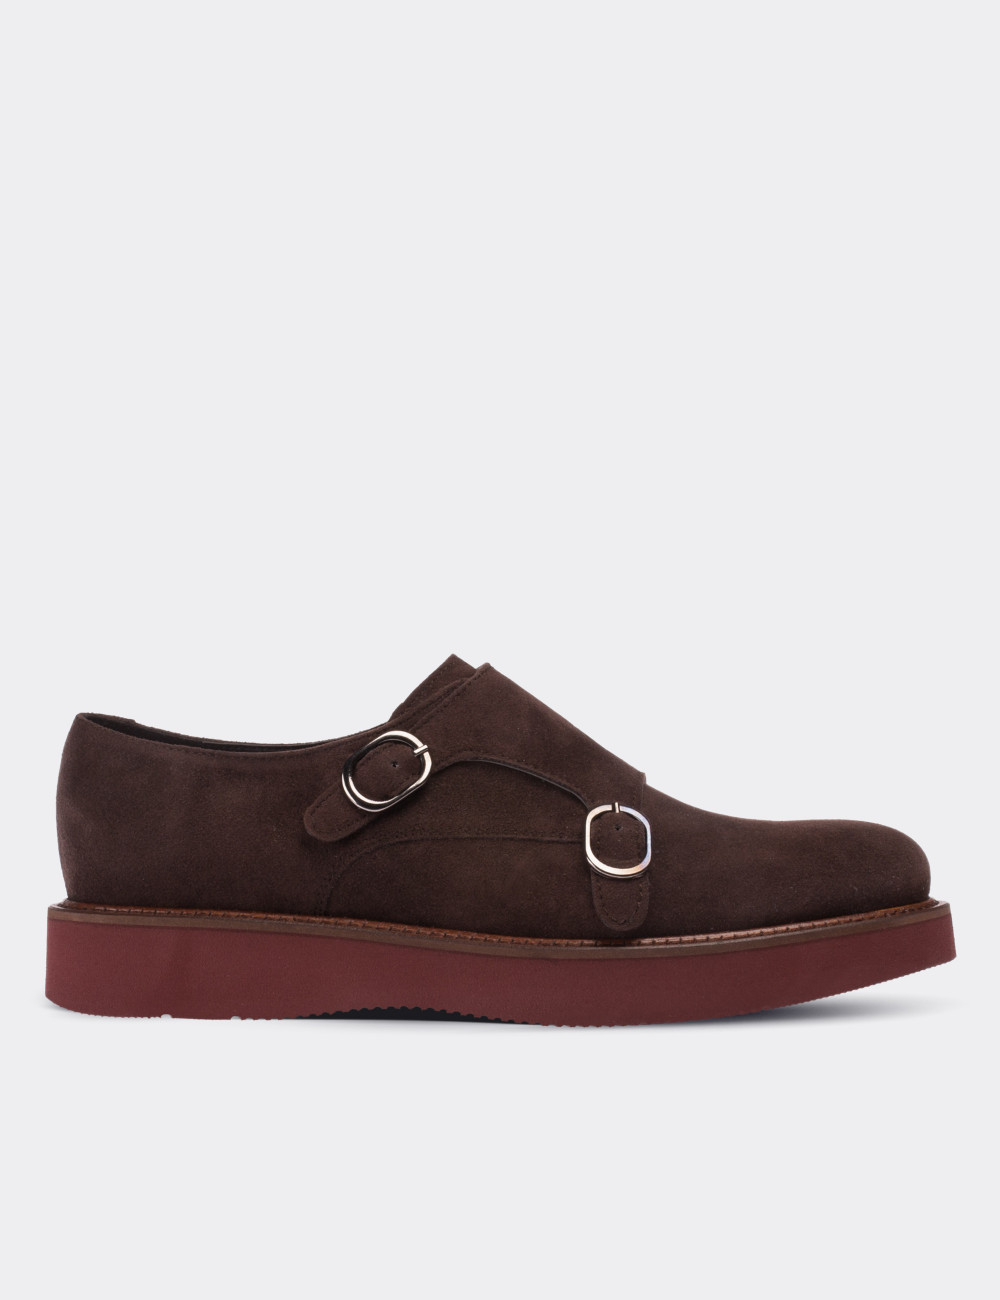 Brown Suede Leather Lace-up Shoes - 01614ZKHVE05